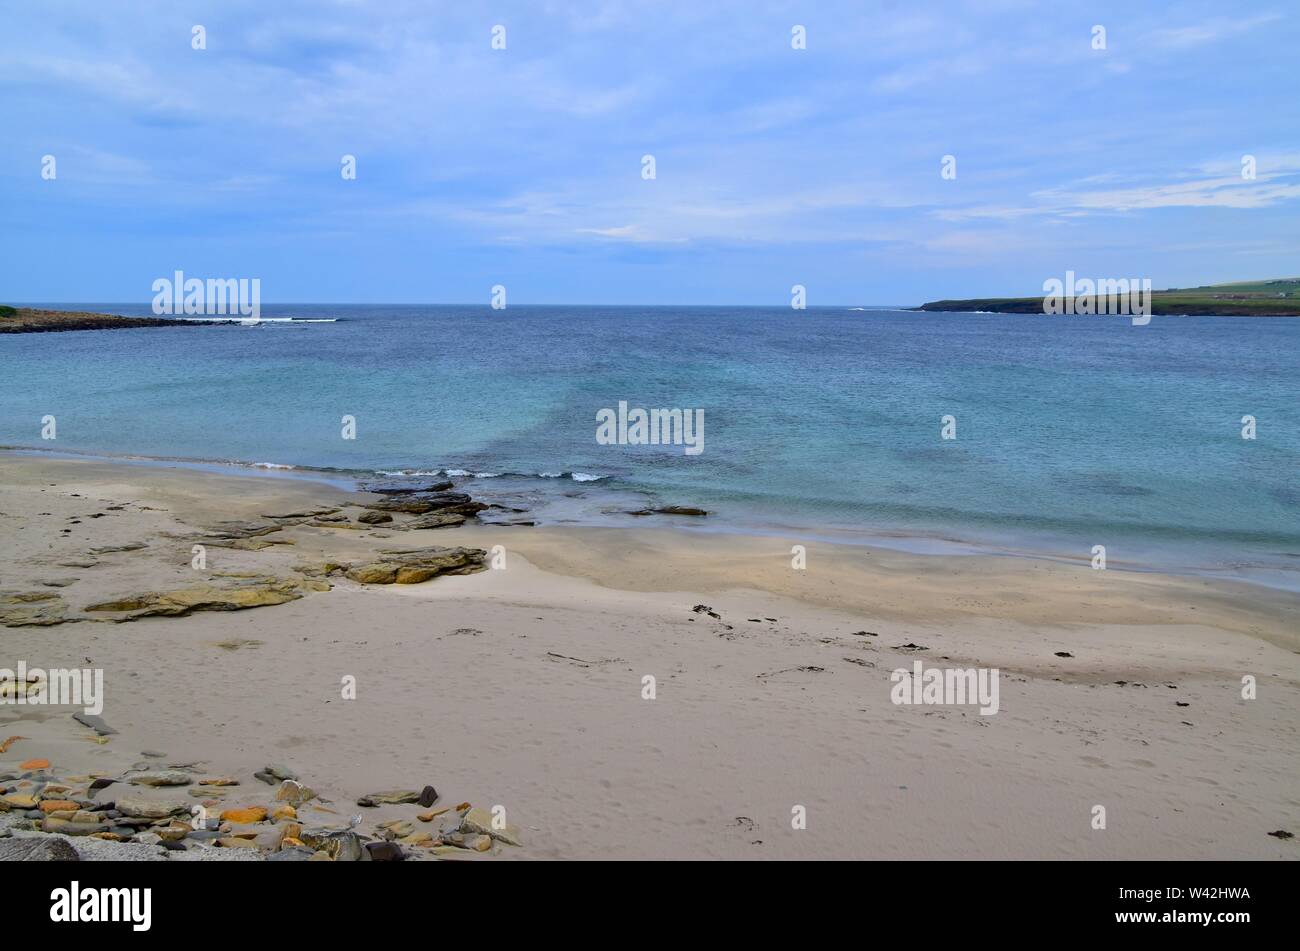 Skaill Bay Beach. Banque D'Images